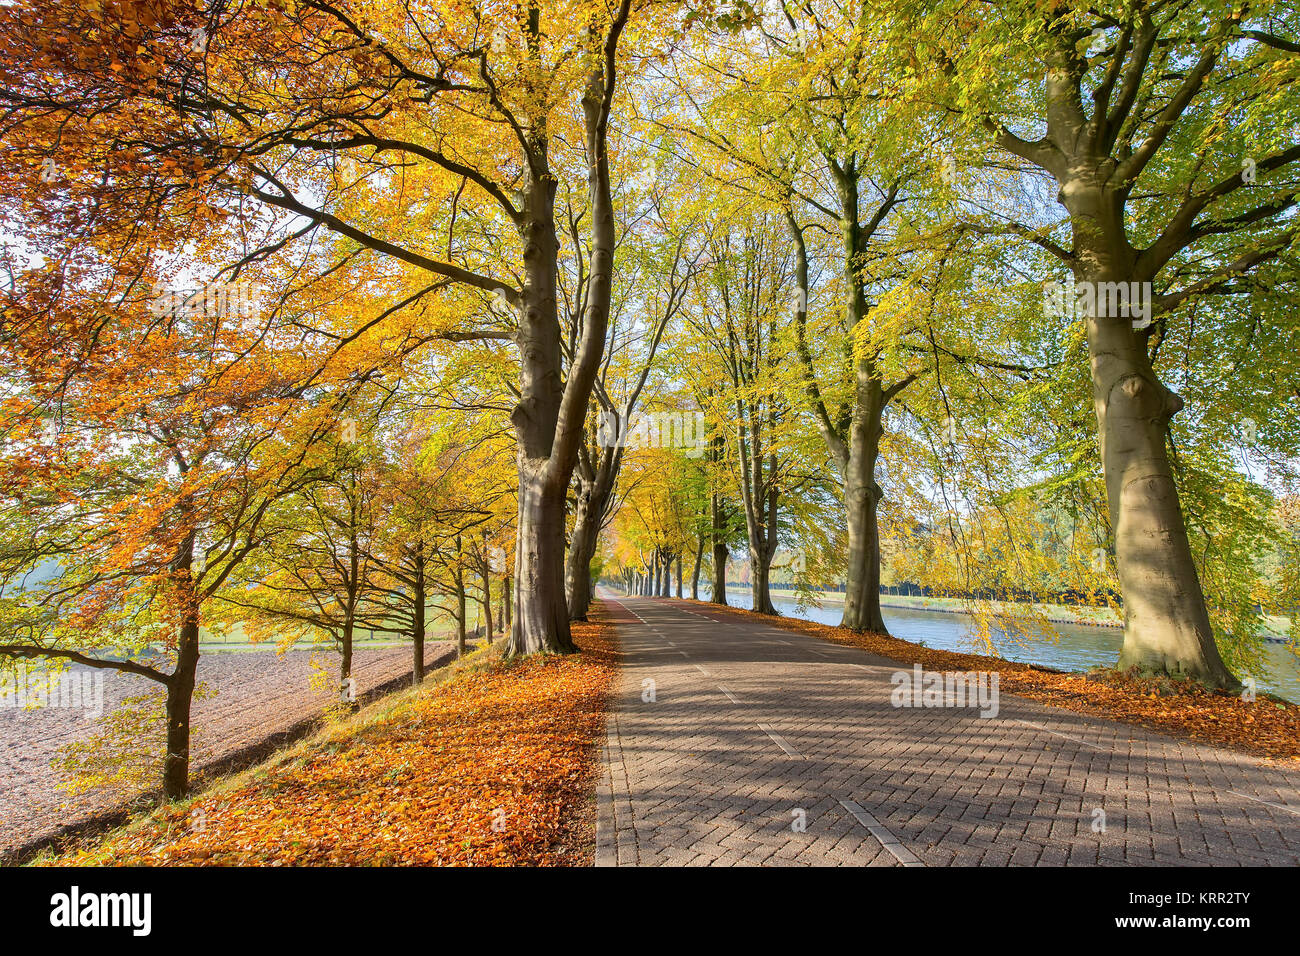 European road and river with beech trees in autumn Stock Photo